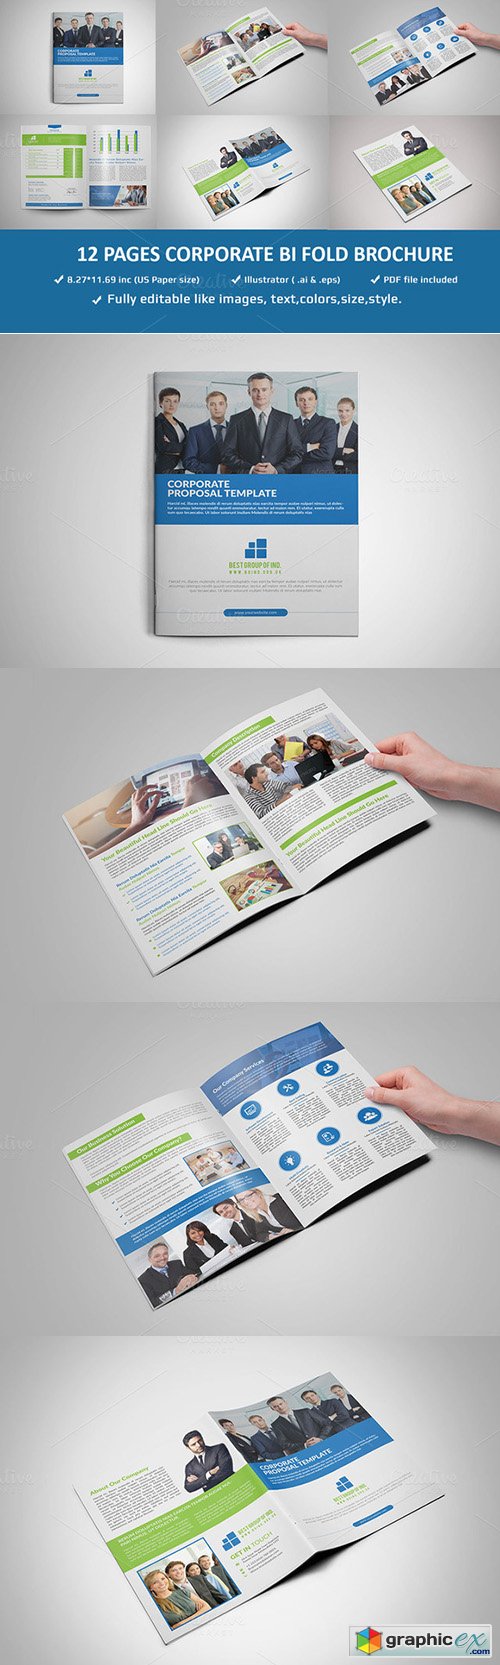 12 Pages Corporate Brochure Template